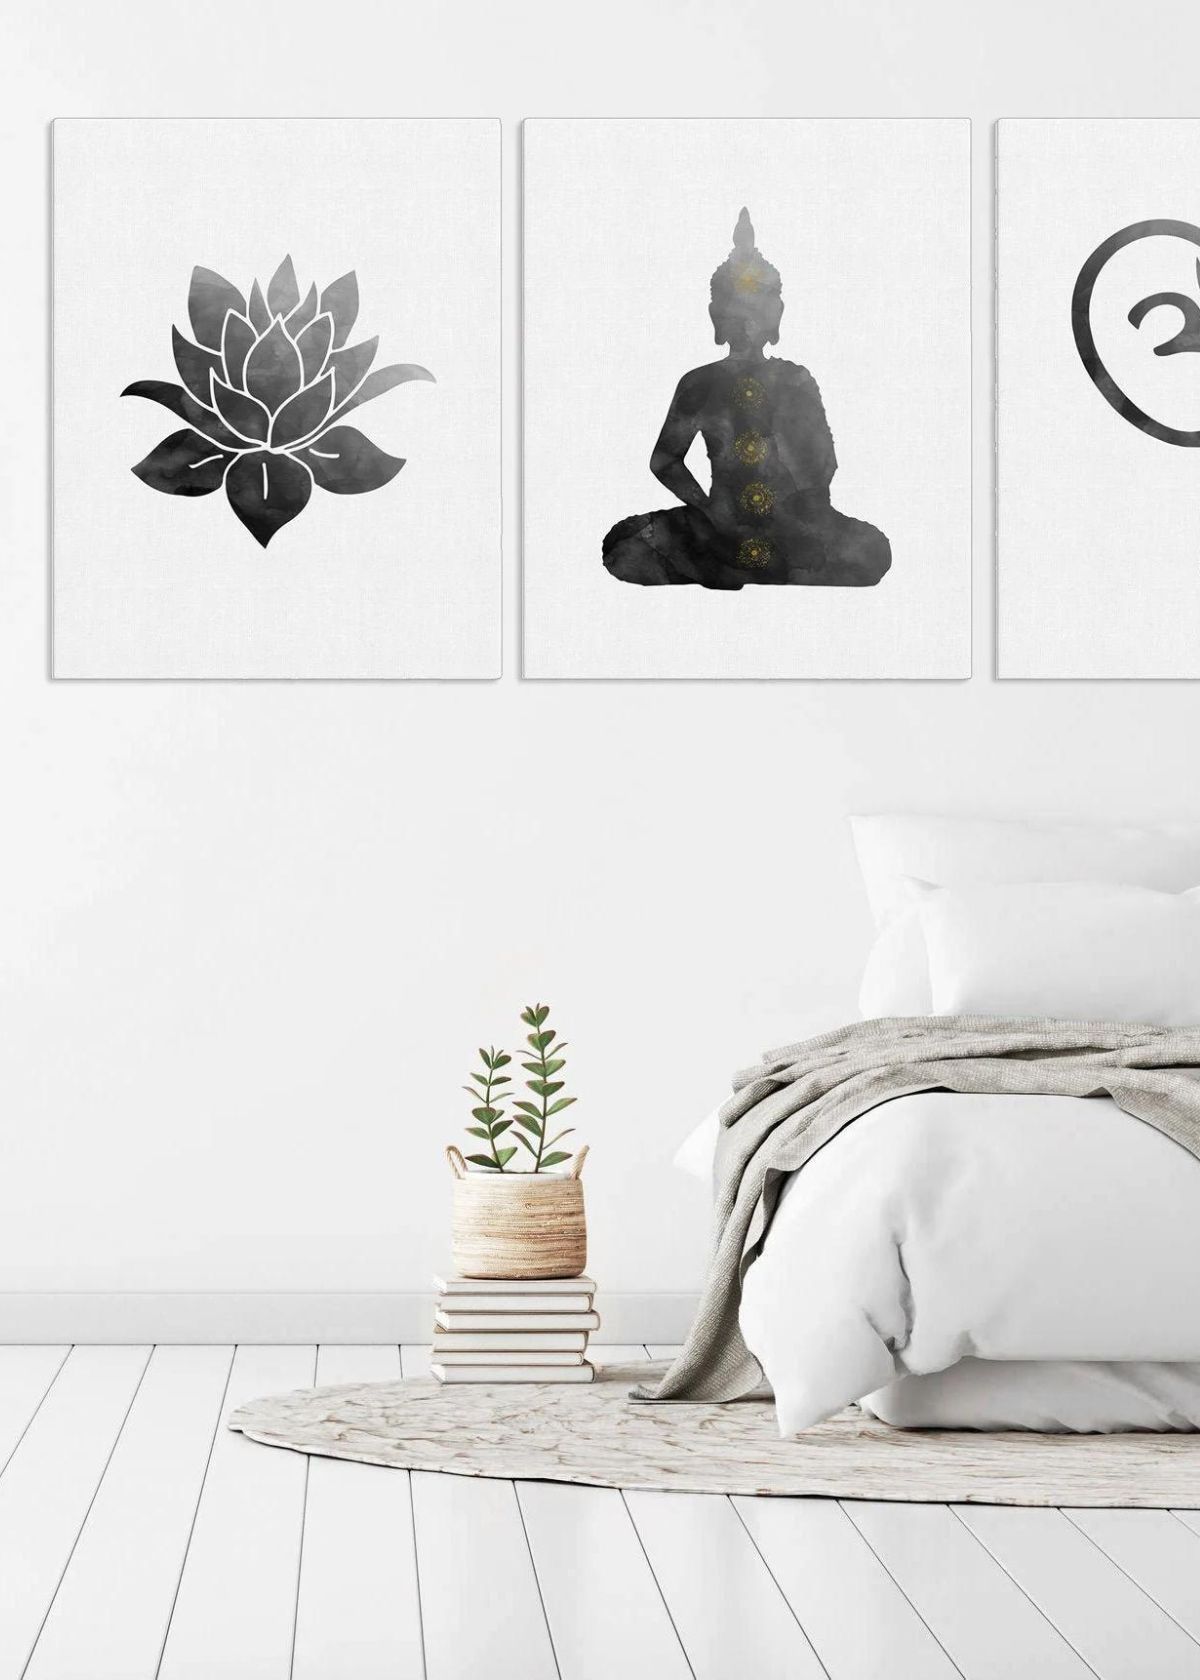 The Best Meditation Wall Decor to Help You Relax and Find Inner Peace: Top Picks